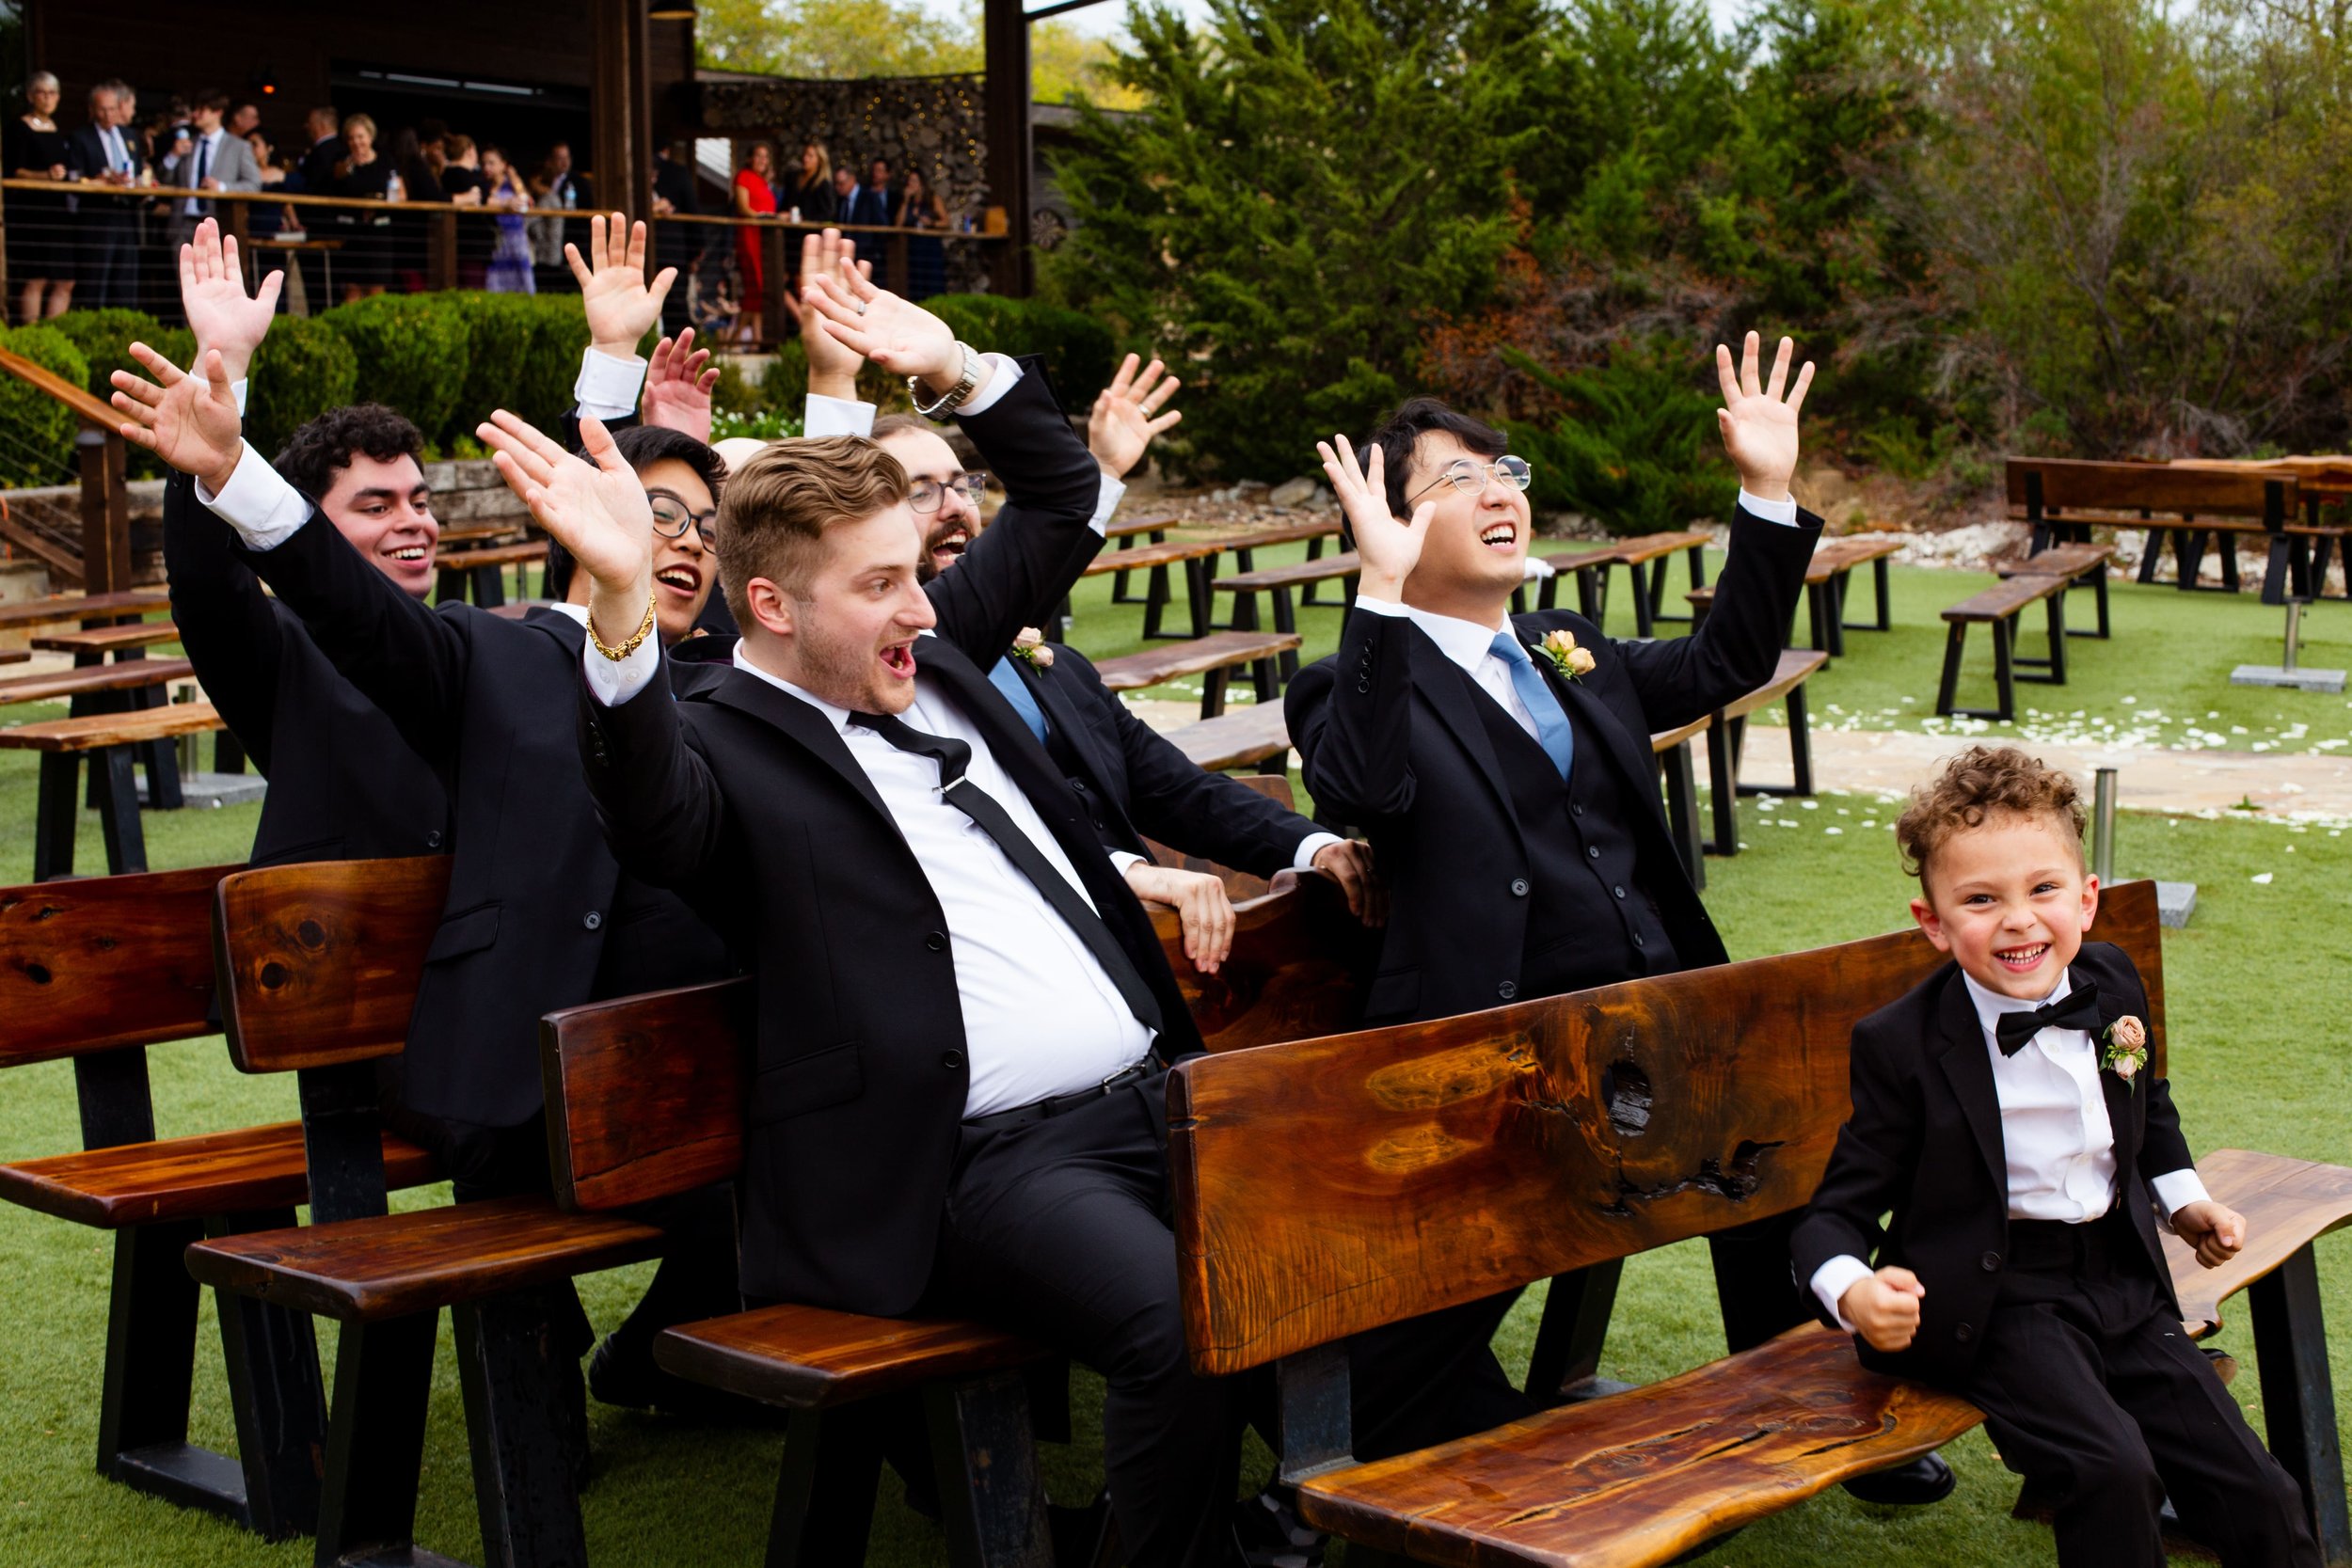 Groomsmen funny photo excited picture with kids